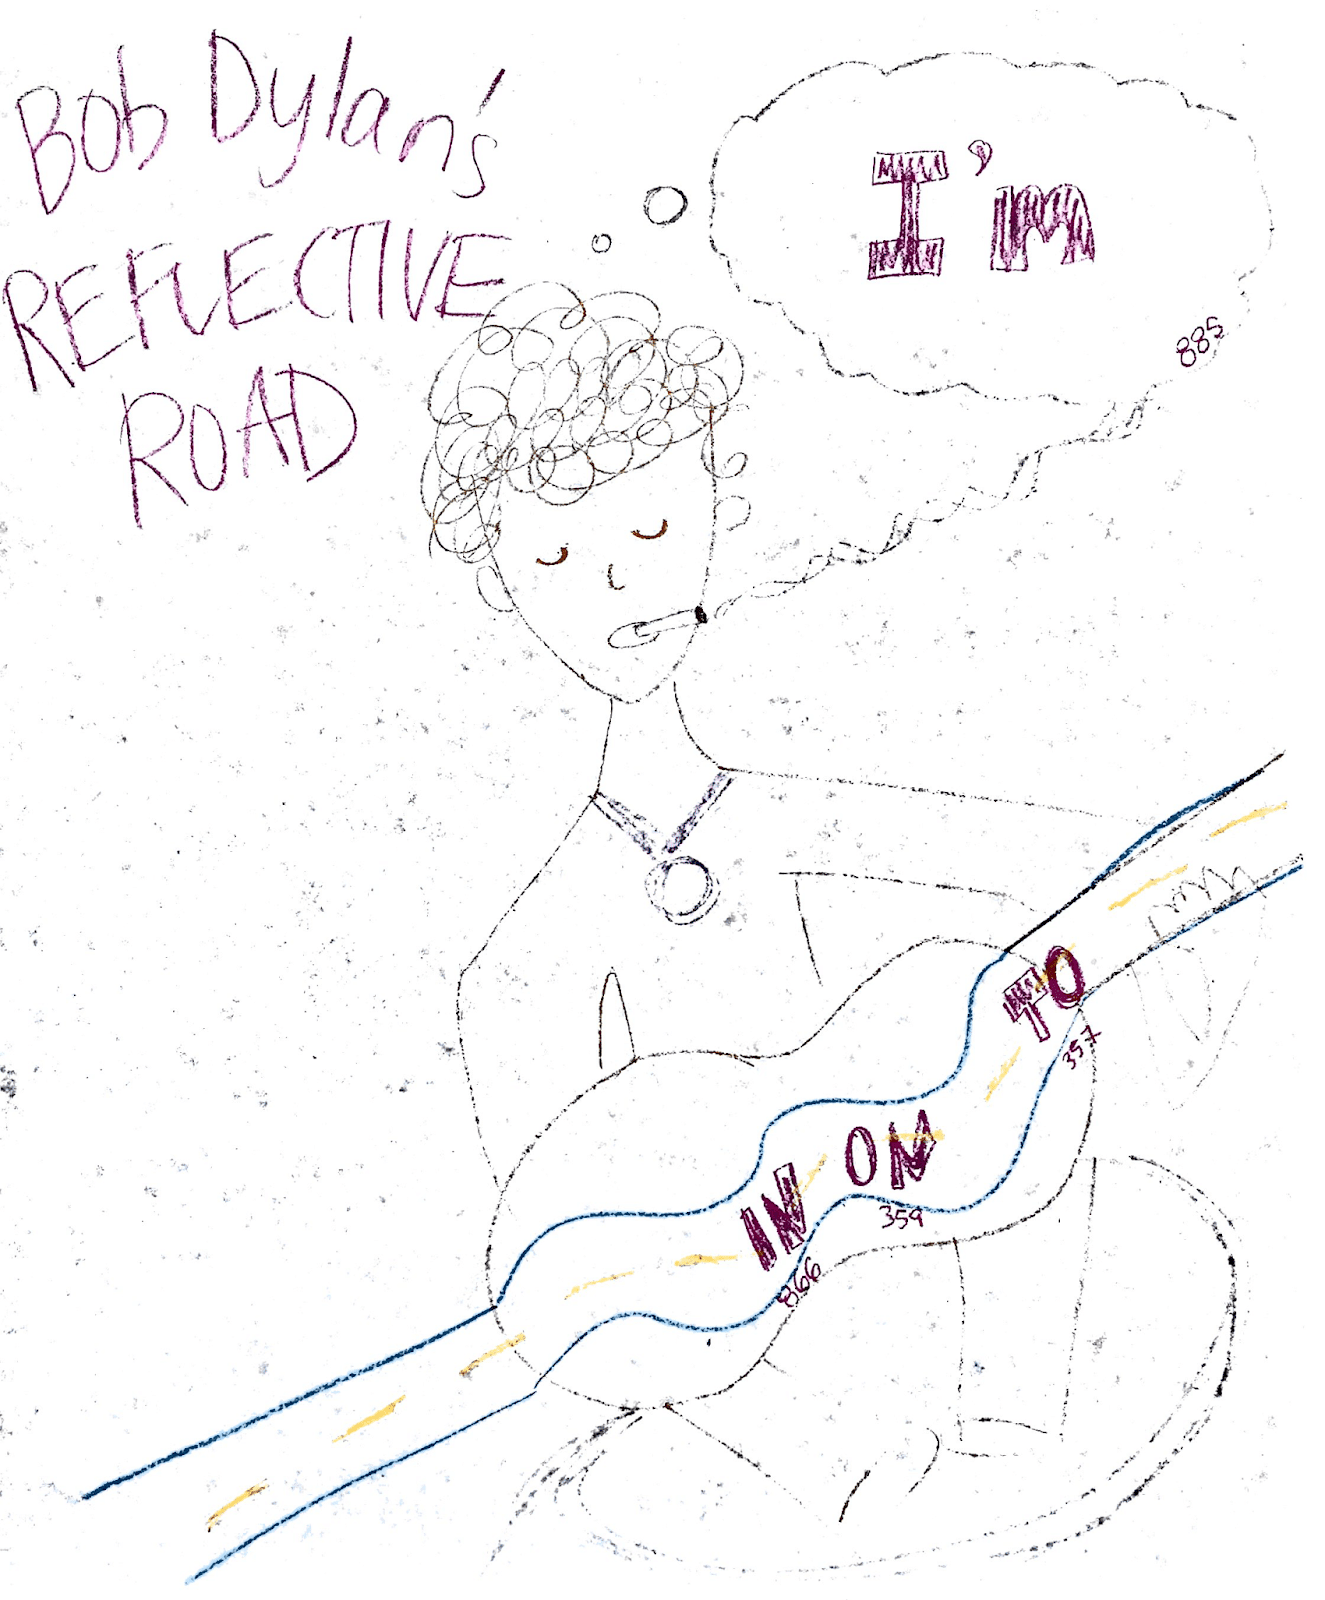 A drawing of Bob Dylan thinking the word “I’m,” holding a guitar with other short words from the dataset written on it.